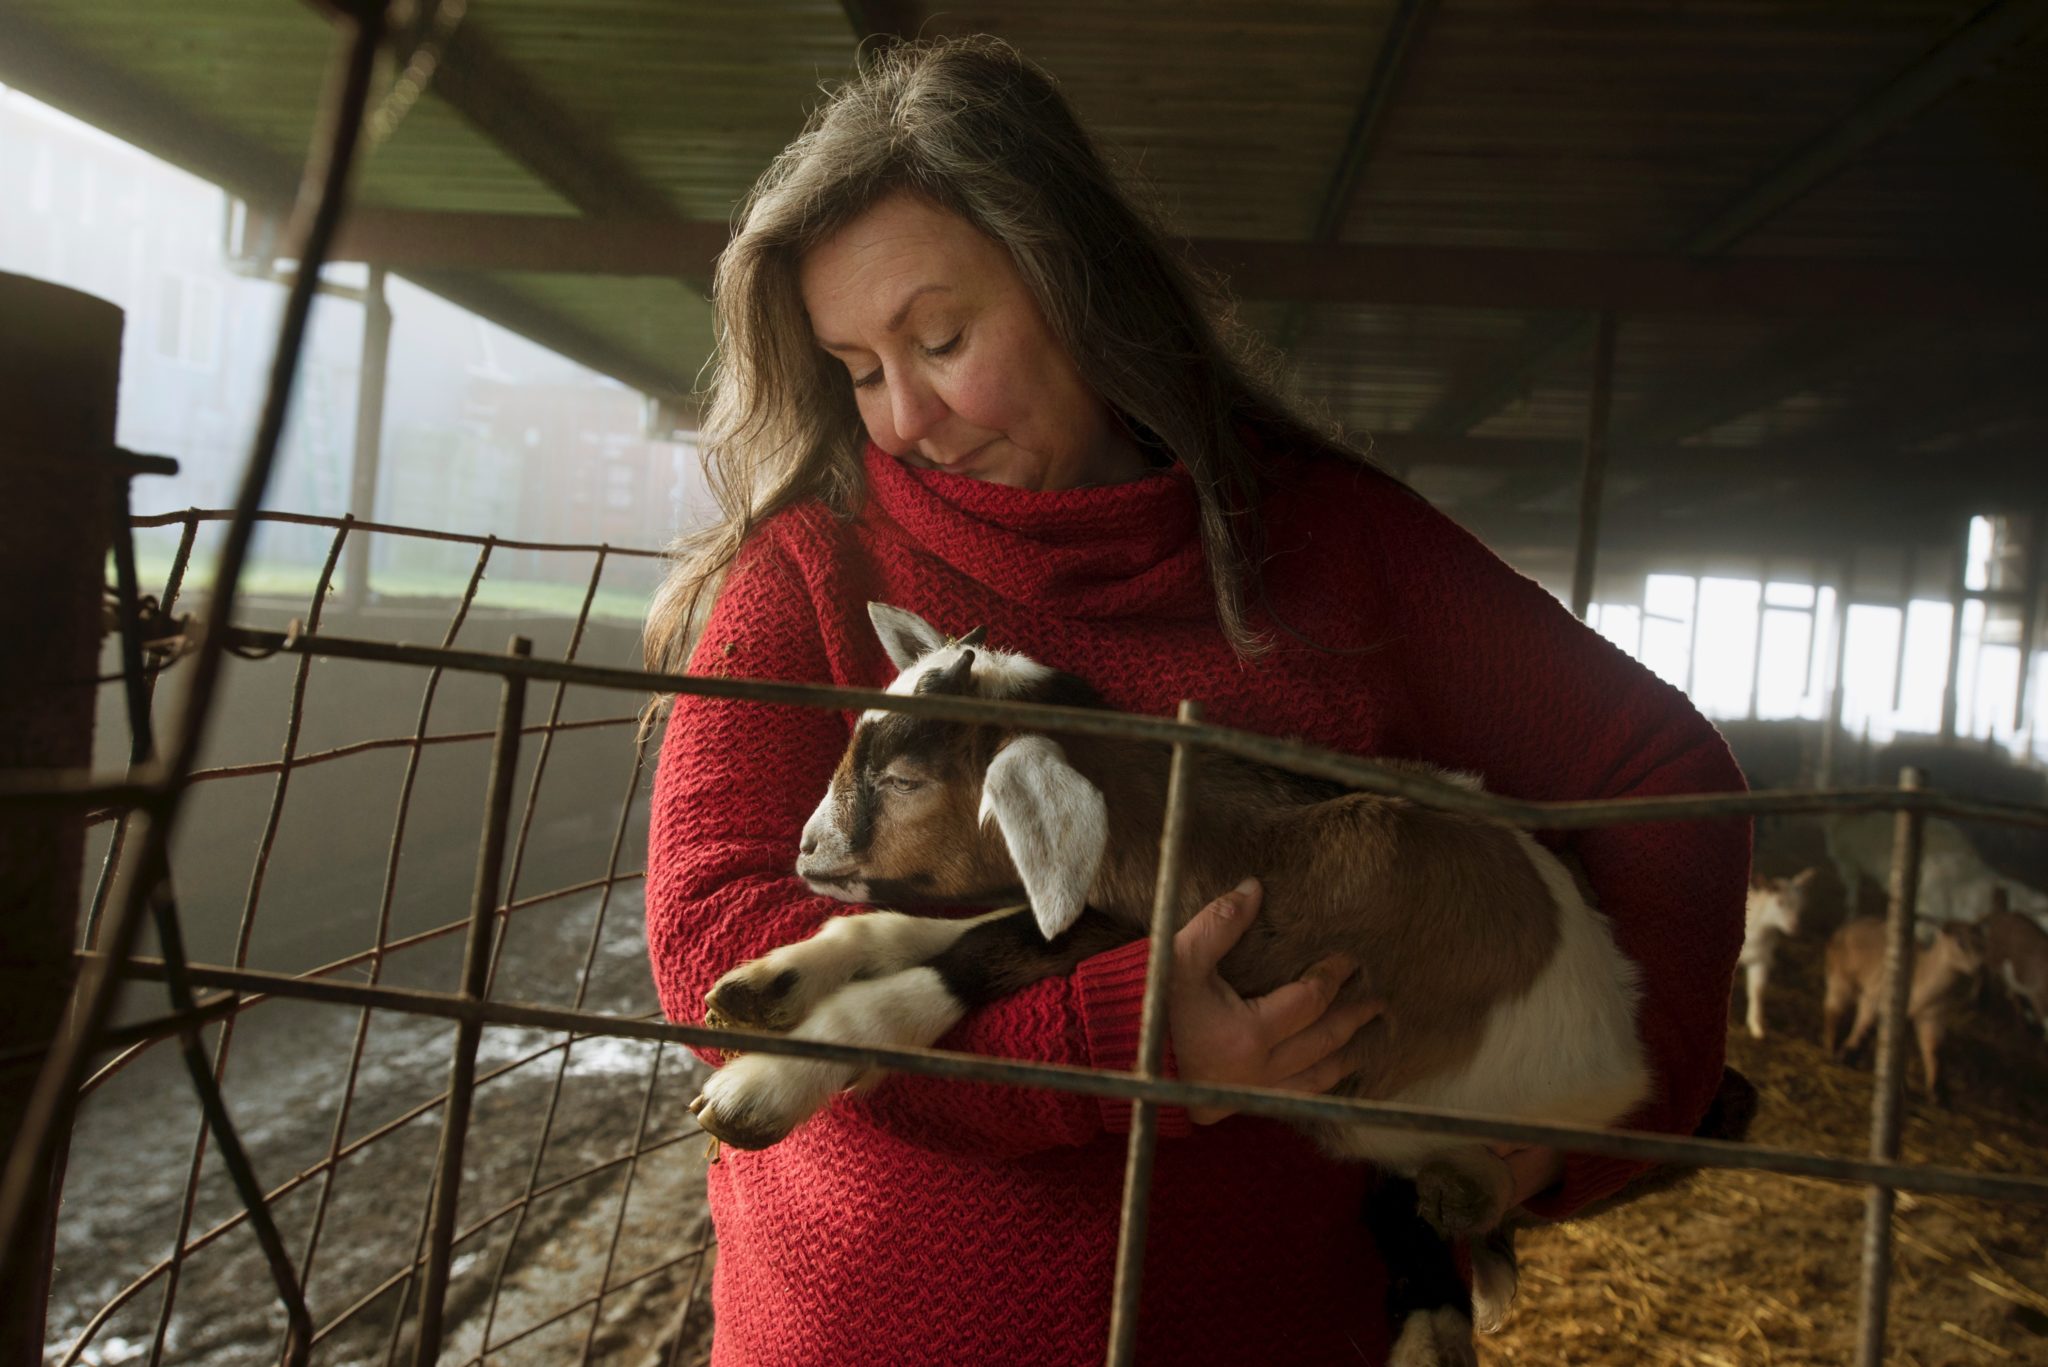 Donna Pacheco with one of her newborn Nubian goats at Achadinha Cheese Company in Petaluma. January 26, 2017. (Photo: Erik Castro/for Sonoma Magazine)